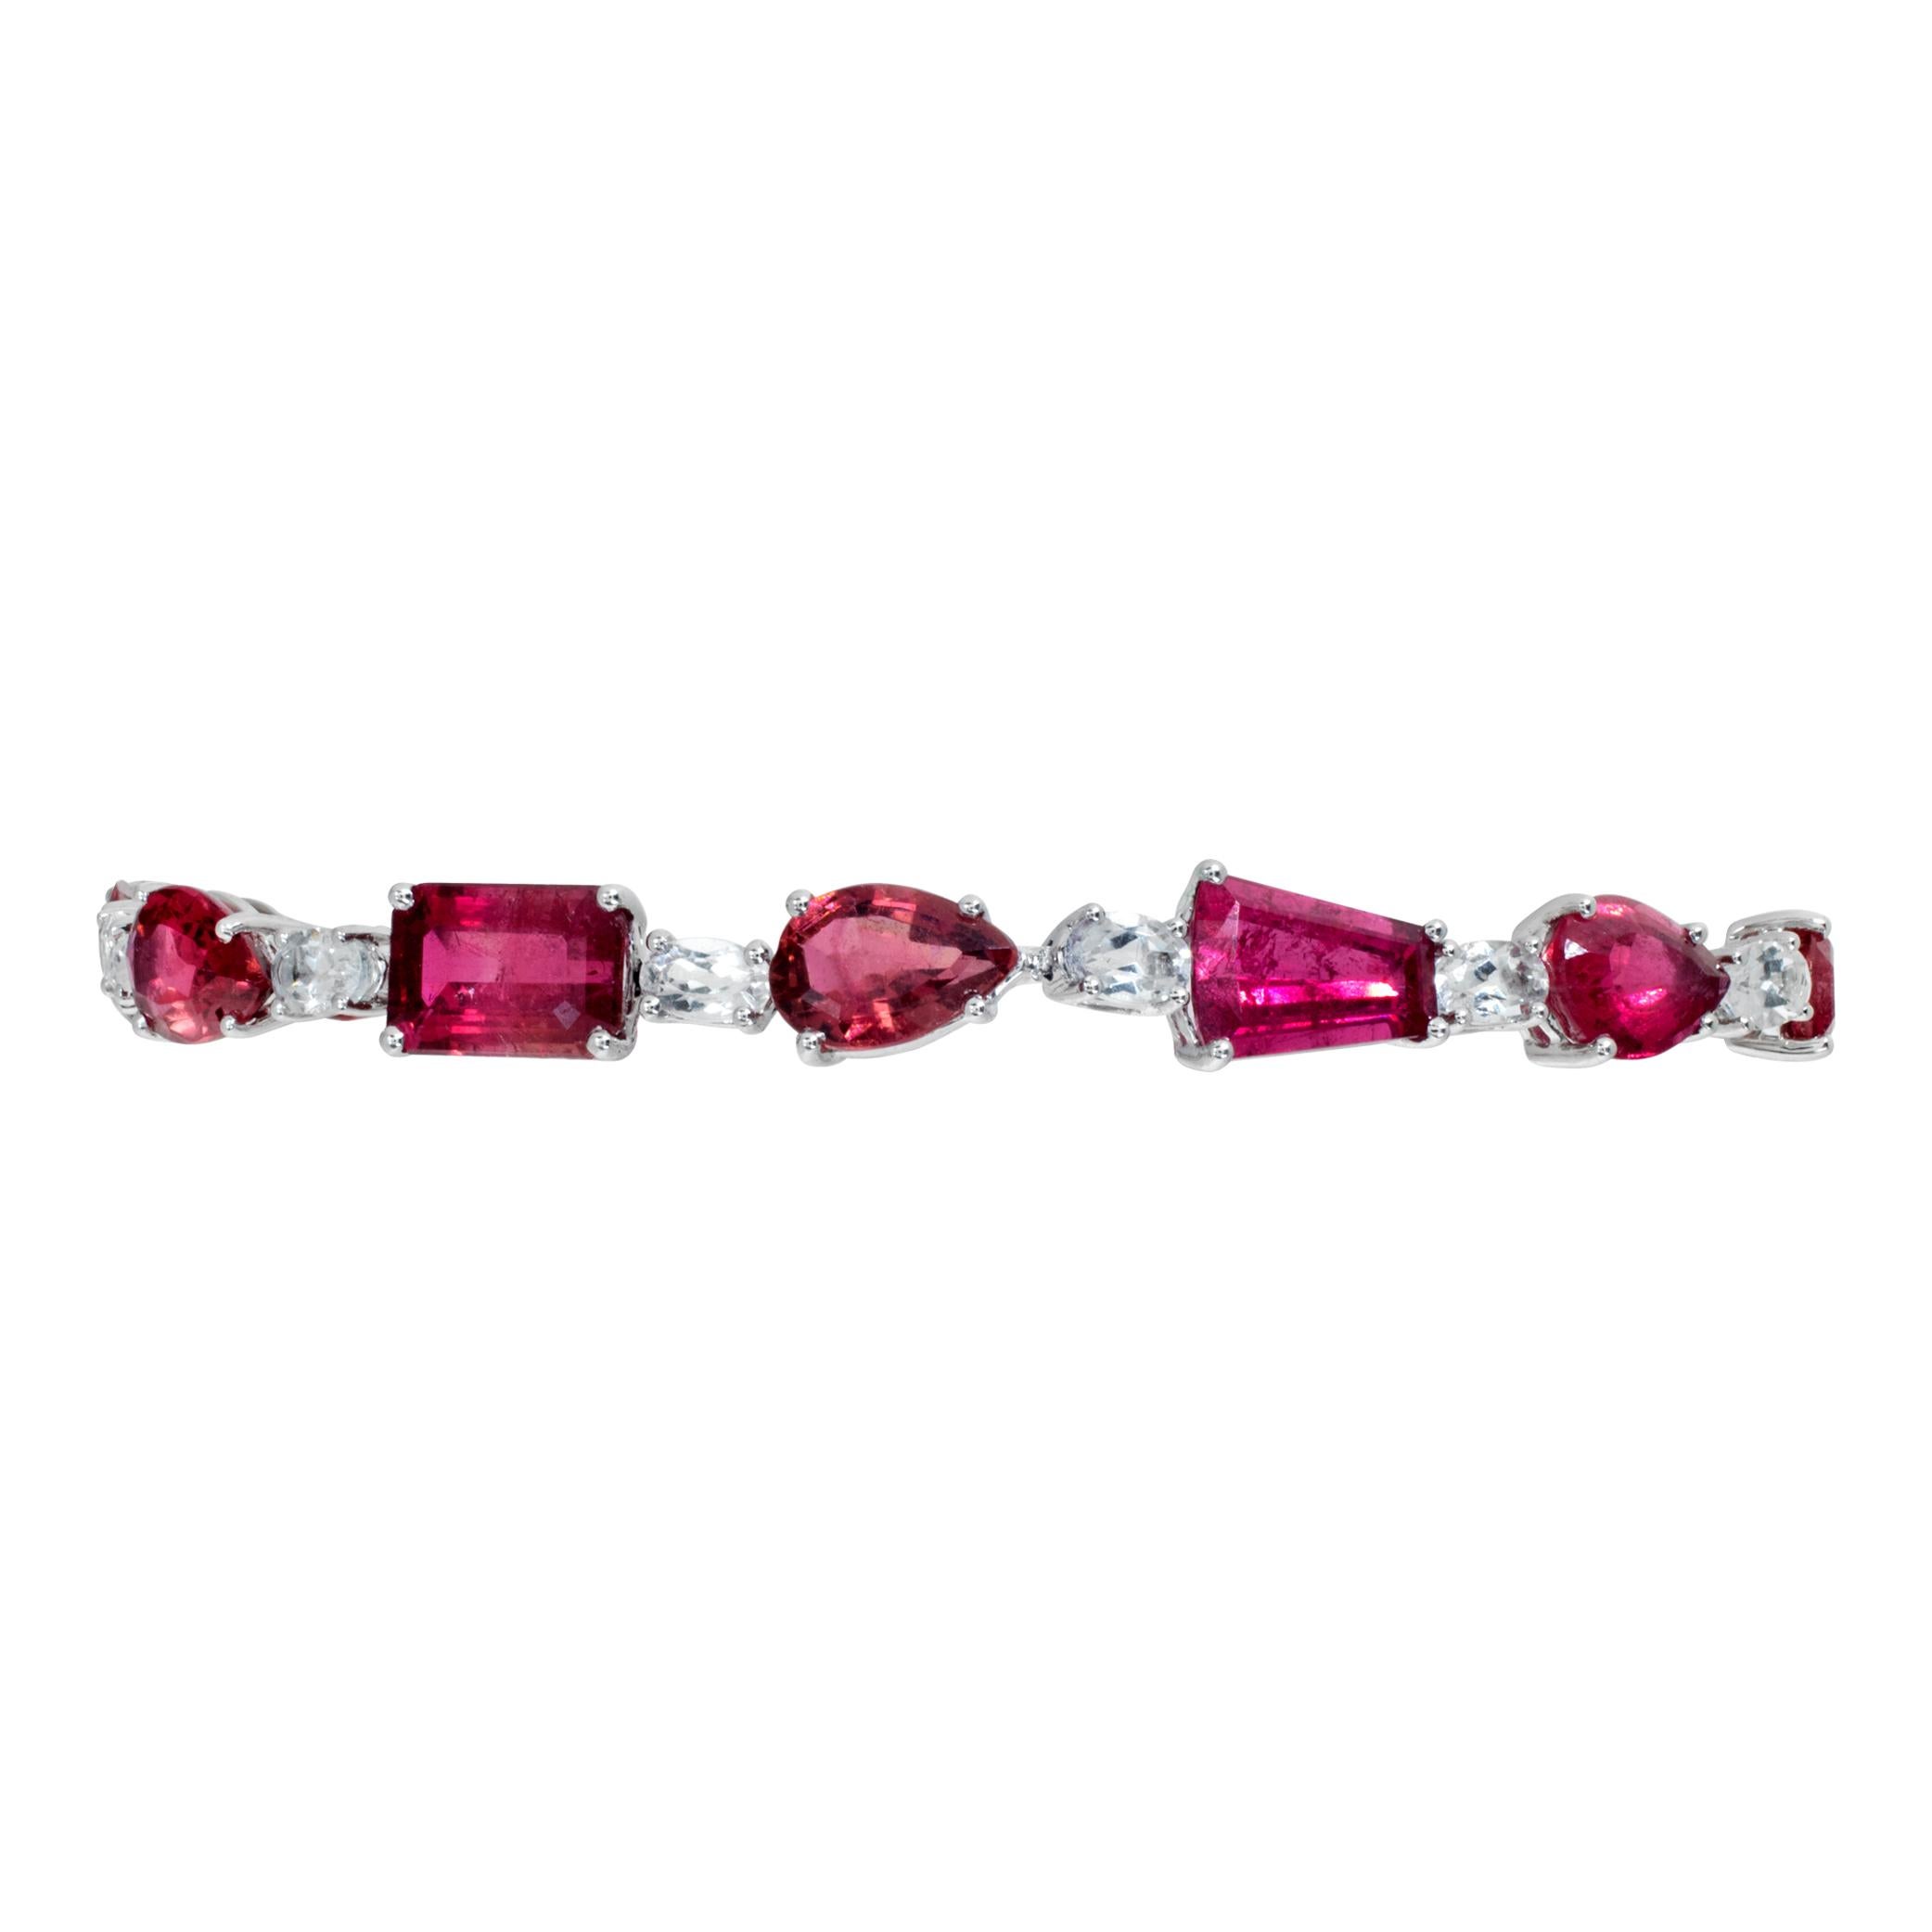 Stunning 18k white gold bracelet with 15.51 carats in emerald cut, pear cut, round cut, and trapezoid cut pink tourmaline & 4.01 carats in oval cut white topaz. Length 7 inches, width 7mm.